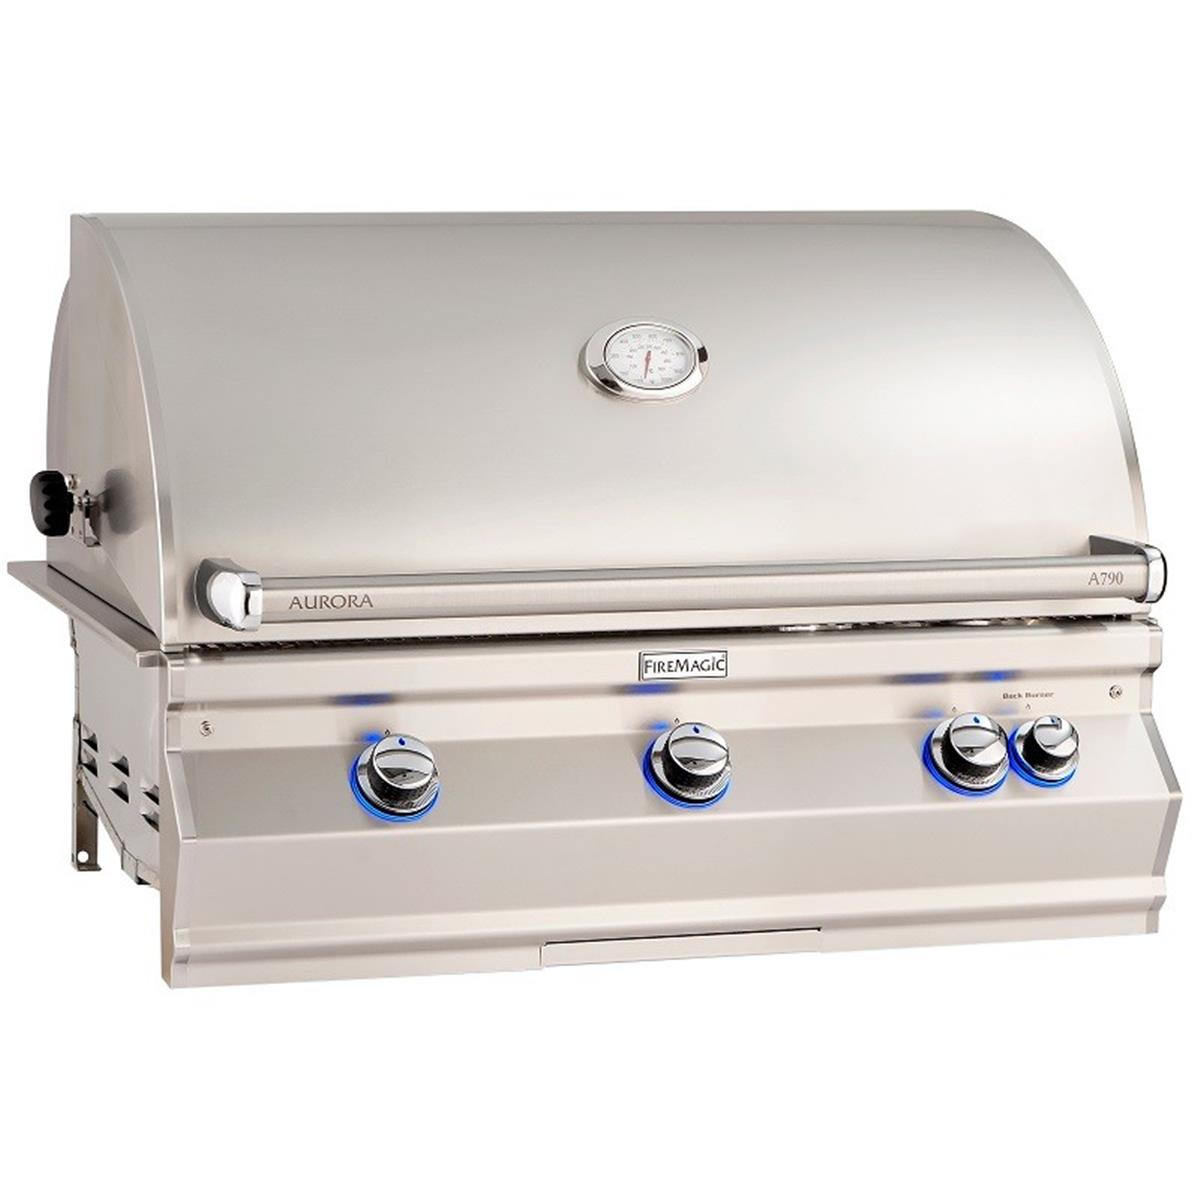 Fire Magic A790I-8EAN 30 in. Aurora Built-In Gas Grill with Backburner & Rotisserie - Natural Gas - A790i HSI